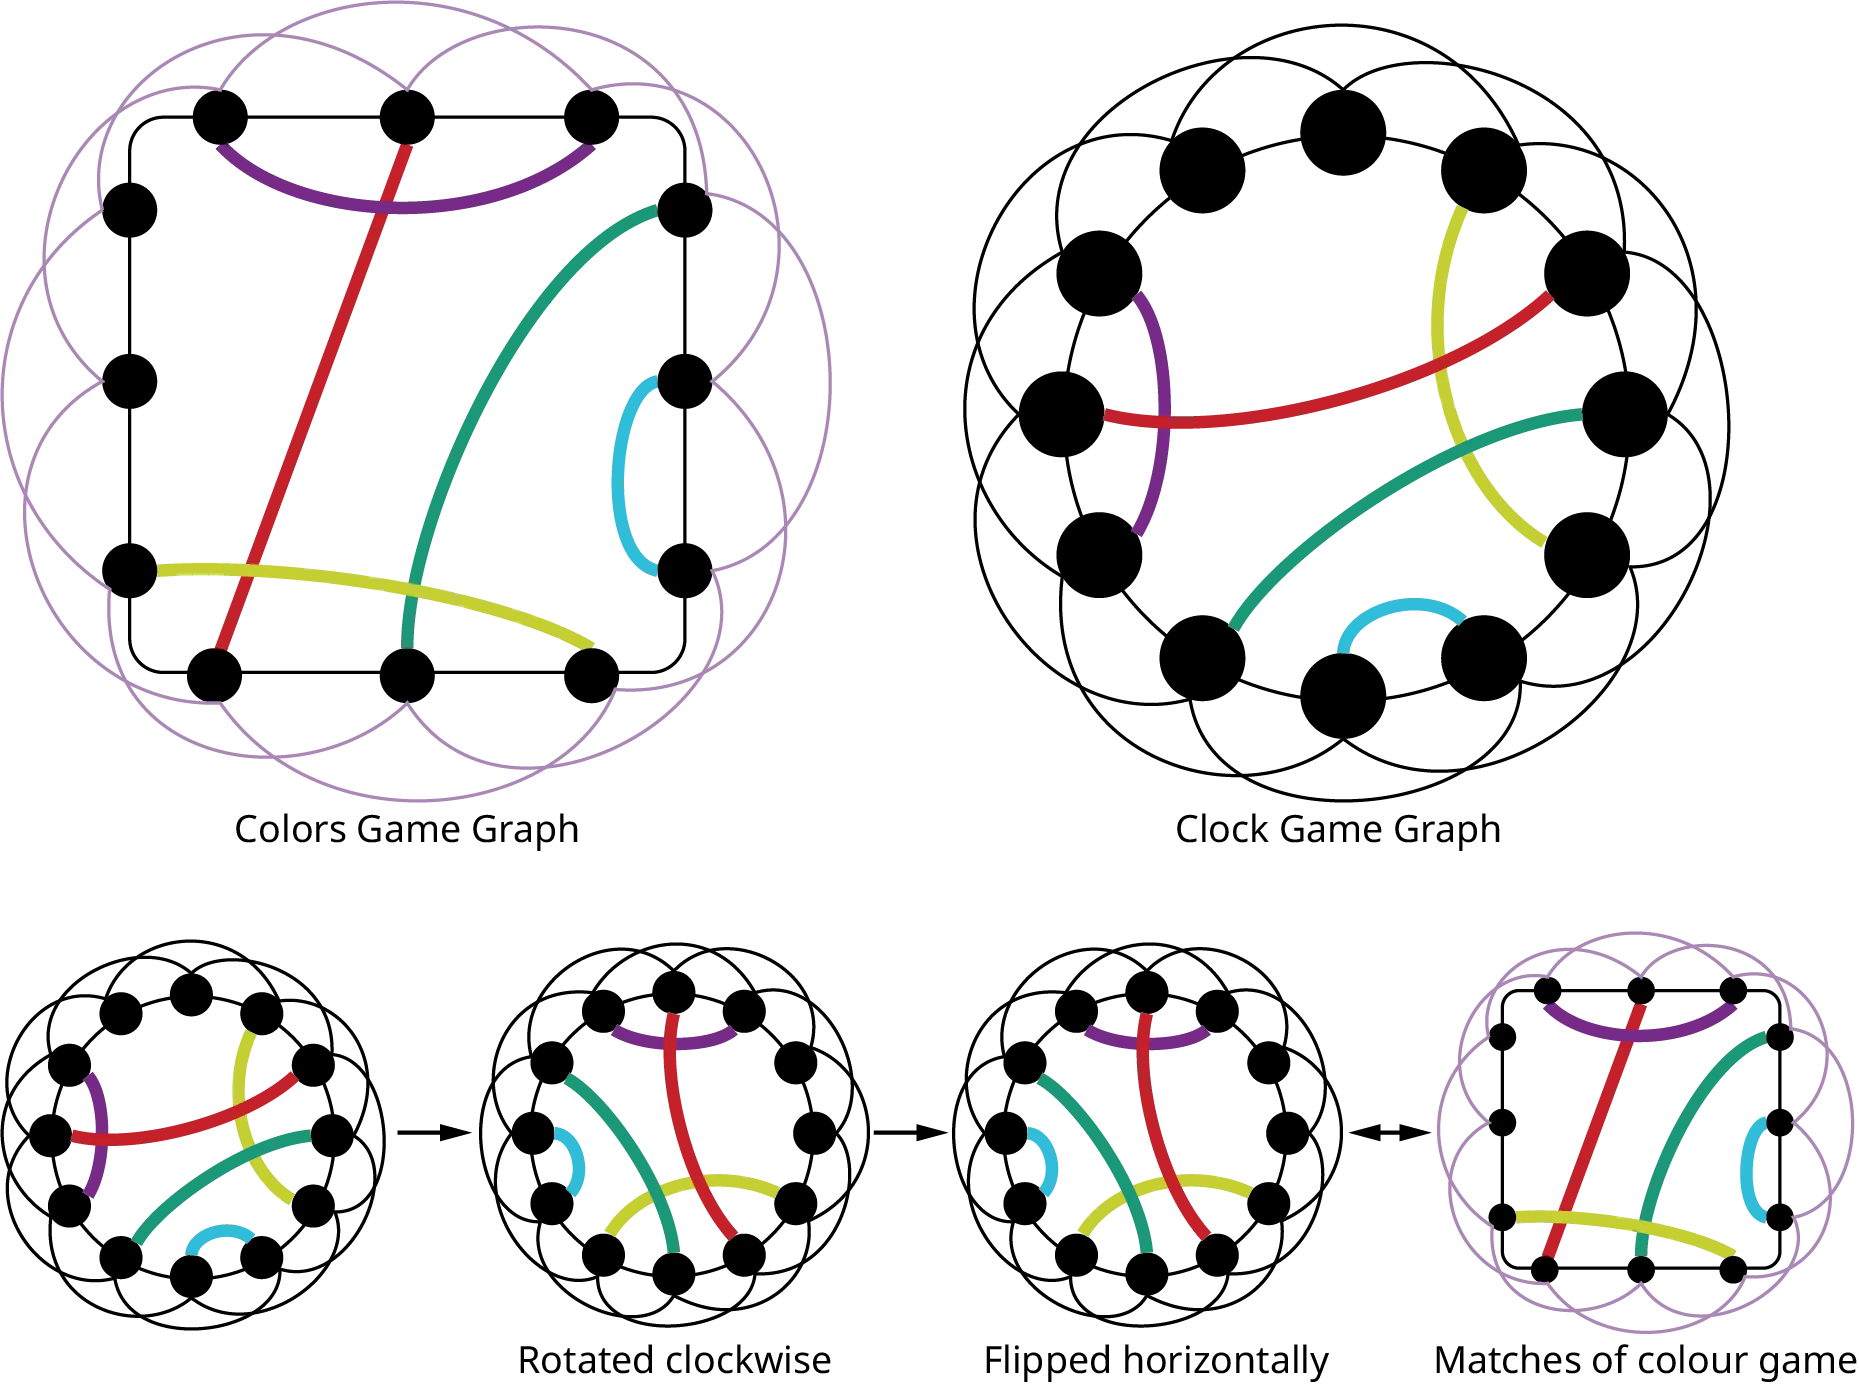 Six graphs. The first graph is labeled Colors Game Graph. It has 12 vertices arranged in a square, with 3 vertices on each side. A purple line connects the first and third vertices on the top. A red line connects the second vertex on the top with the first vertex on the bottom. A dark green line connects the first vertex on the right side with the second vertex on the bottom. A blue line connects the second and third vertices on the right side. A light green line connects the third vertex on the bottom and the third vertex on the left side. Lines connect each vertex with the vertices two spots to the right and two spots to the left of it. The second graph is labeled Clock Game Graph. It has 12 vertices arranged in a circle. A light green line connects the first and fourth vertices. A red line connects the second and ninth vertices. A dark green line connects the third and seventh vertices. A blue line connects the fifth and sixth vertices. A purple line connects the eighth and tenth vertices. Lines connect each vertex with the vertices two spots to the right and two spots to the left of it. The third graph is the same as the Clock Game Graph. An arrow points to the fourth graph, which shows the Clock Game Graph rotated clockwise so the lines appear three vertices to the right of their original location. An arrow points to the fifth graph, which shows the rotated Clock Game Graph flipped horizontally so it is a mirror image of the previous graph. A double-sided arrow connects the fifth graph and the sixth graph, which is the Colors Game Graph, to show the two graphs now match.